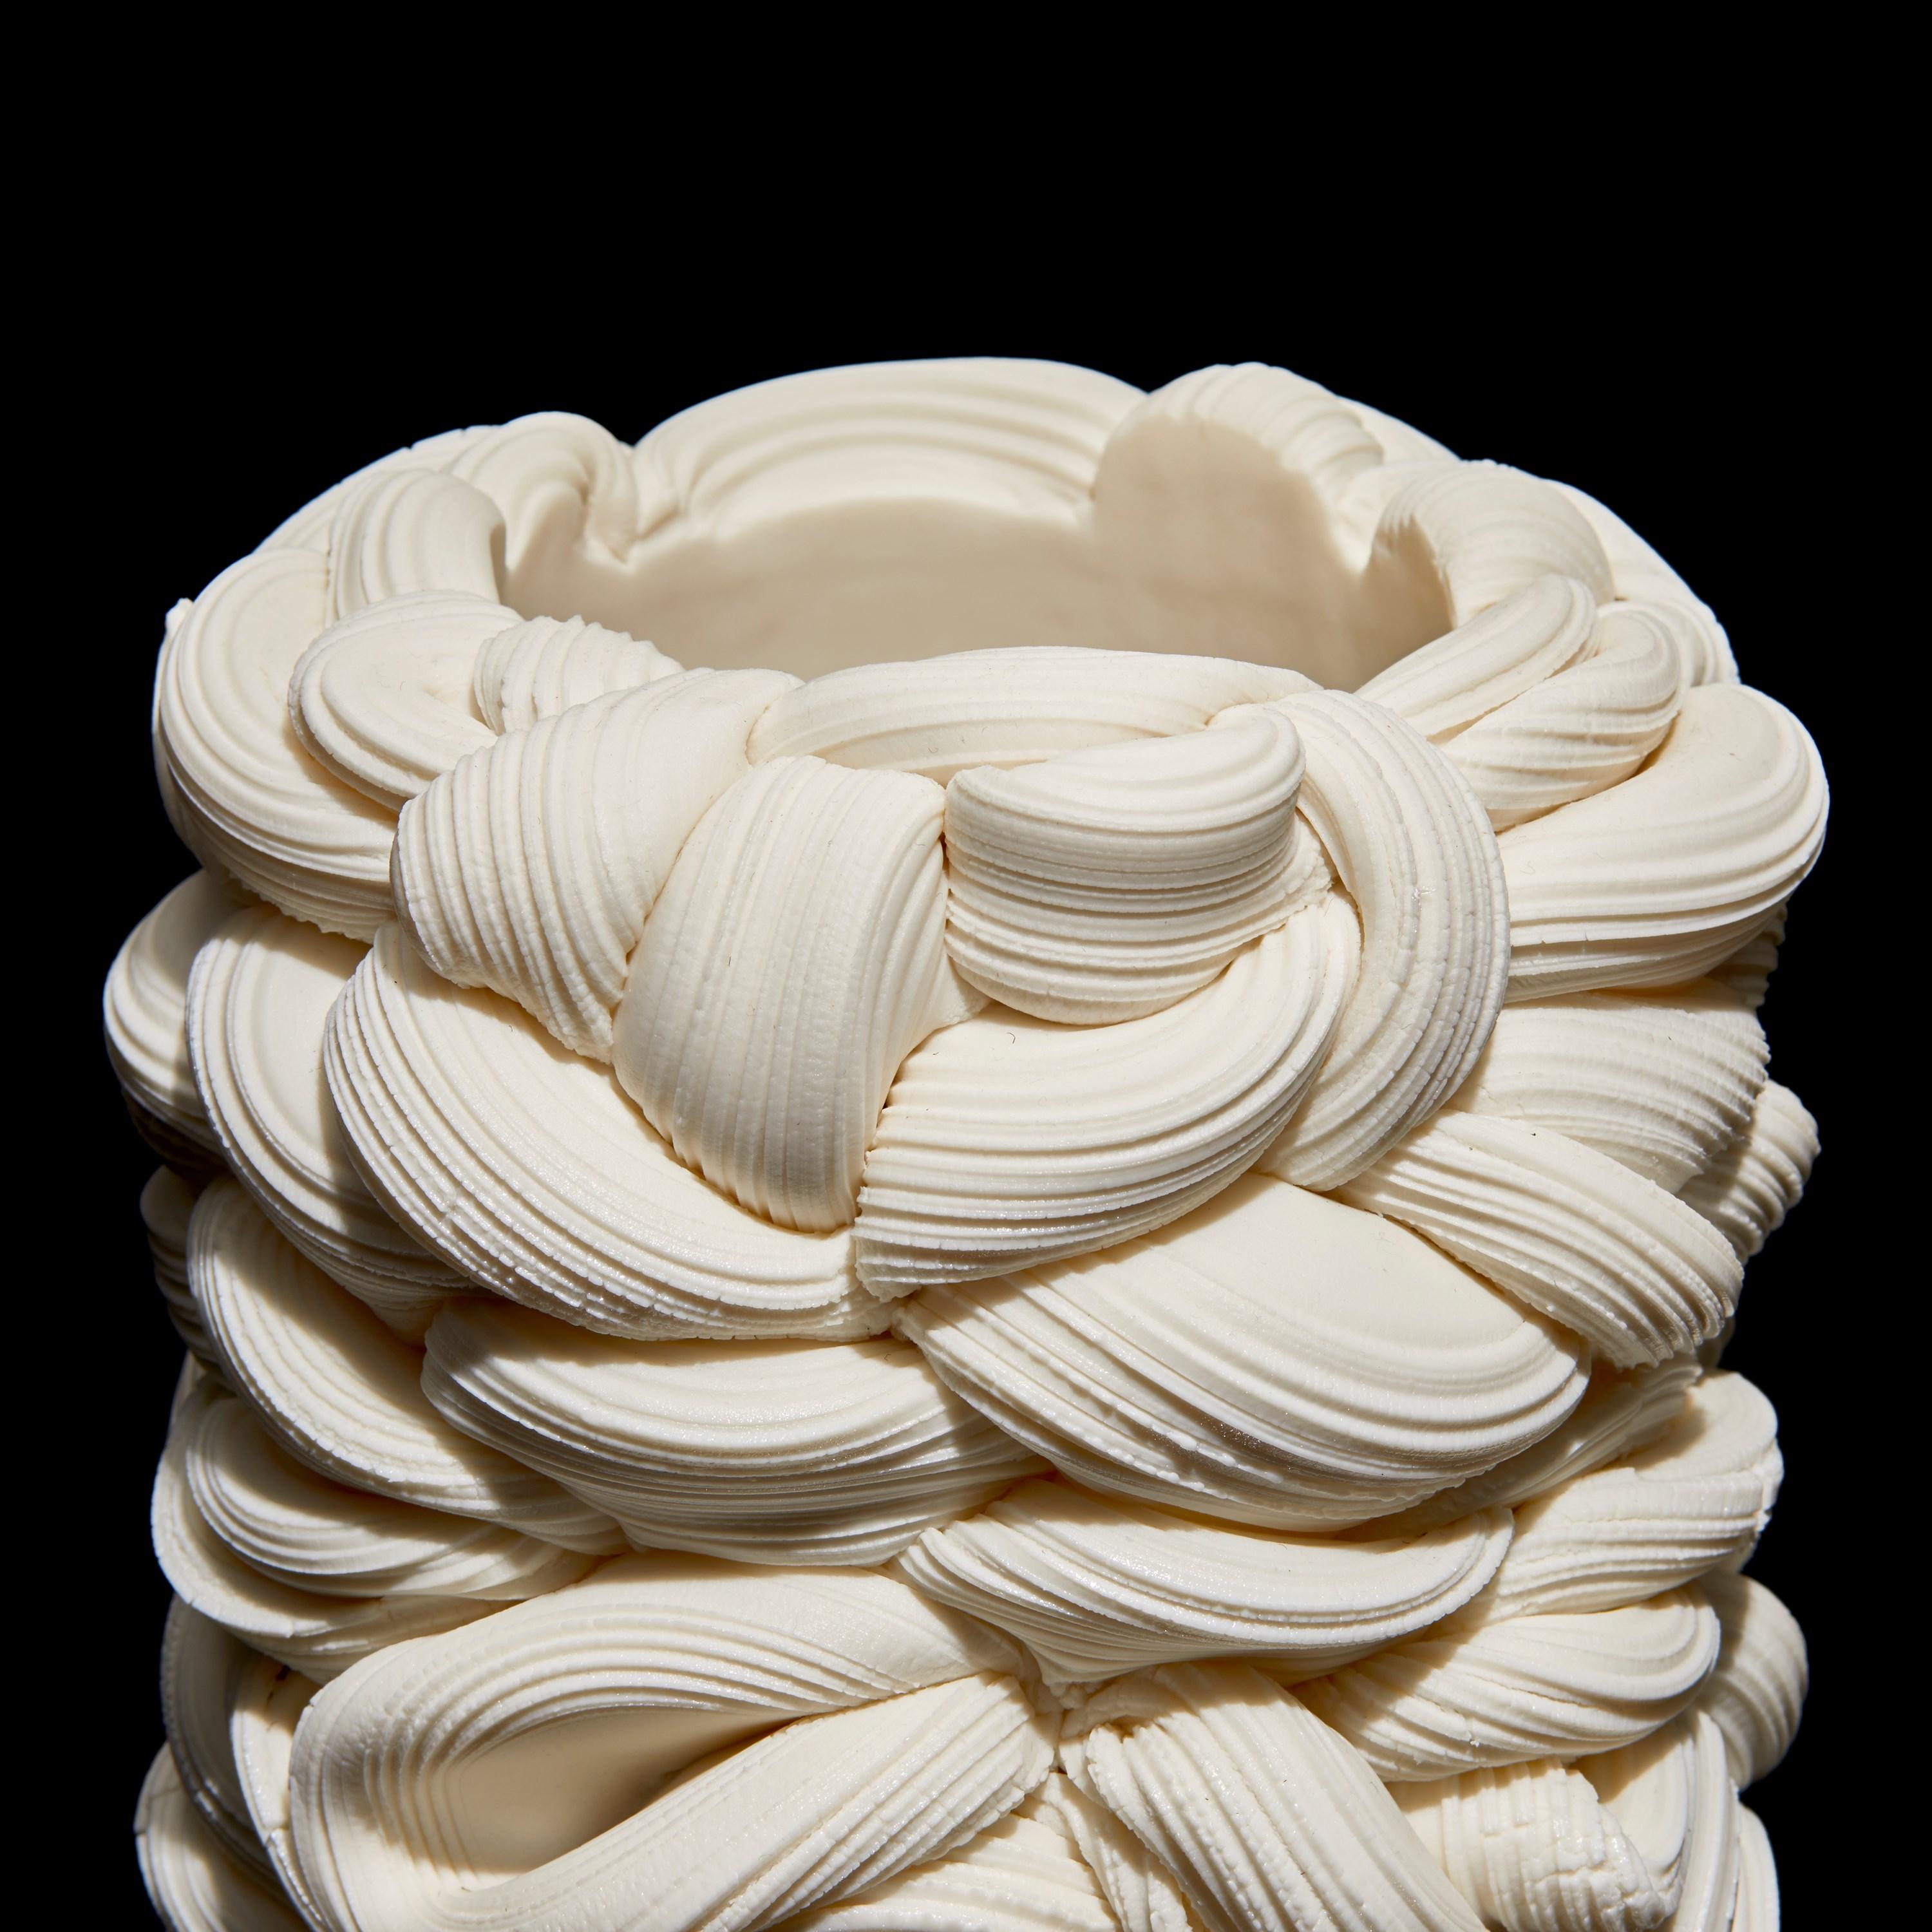 Contemporary Achromatic Fold in White II, a Parian Porcelain Vessel by Steven Edwards For Sale